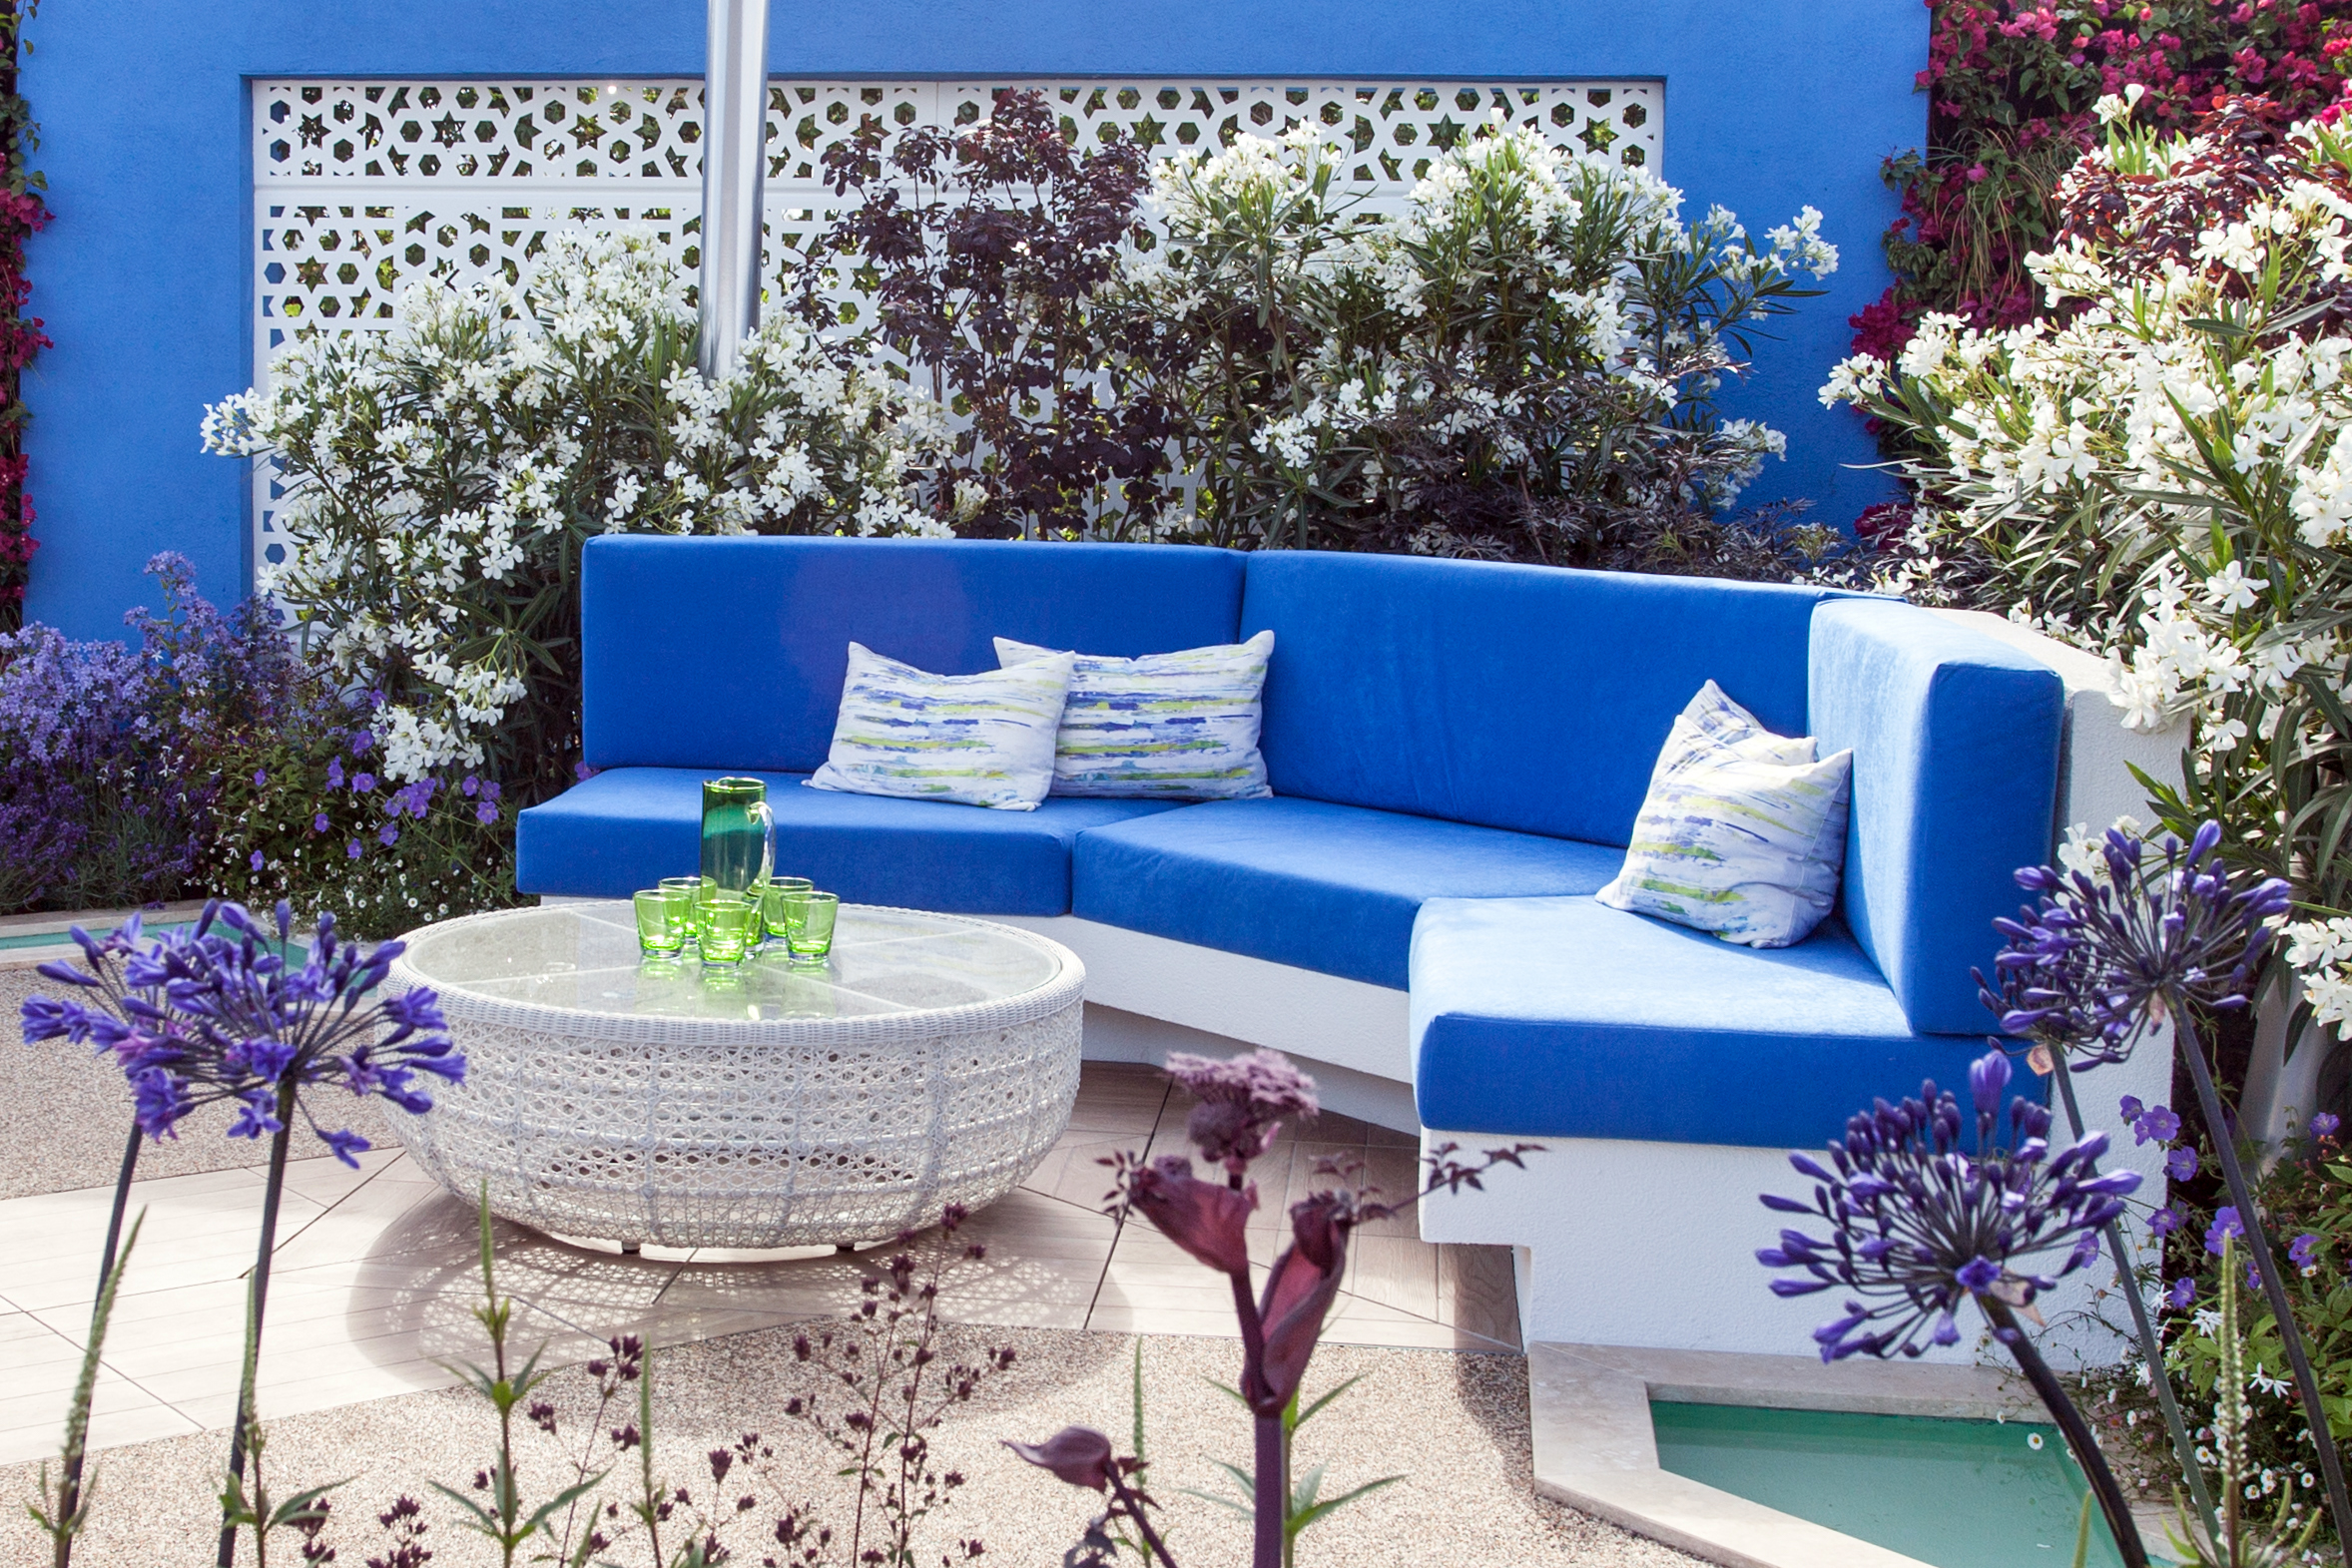 Five ways to make a small courtyard stand out